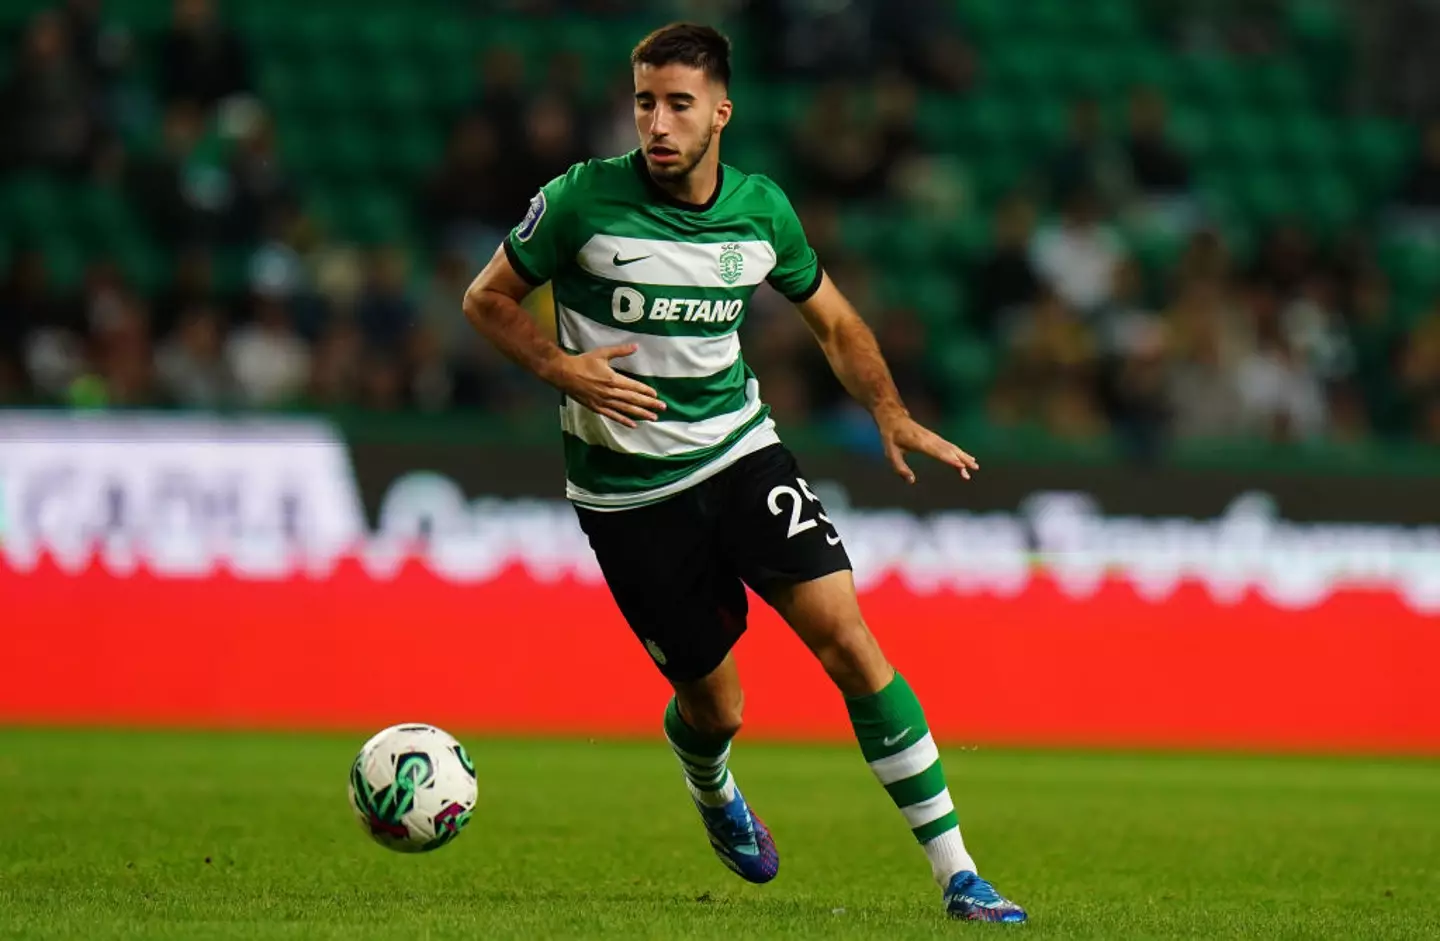 Goncalo Inacio pictured playing for Sporting Lisbon (